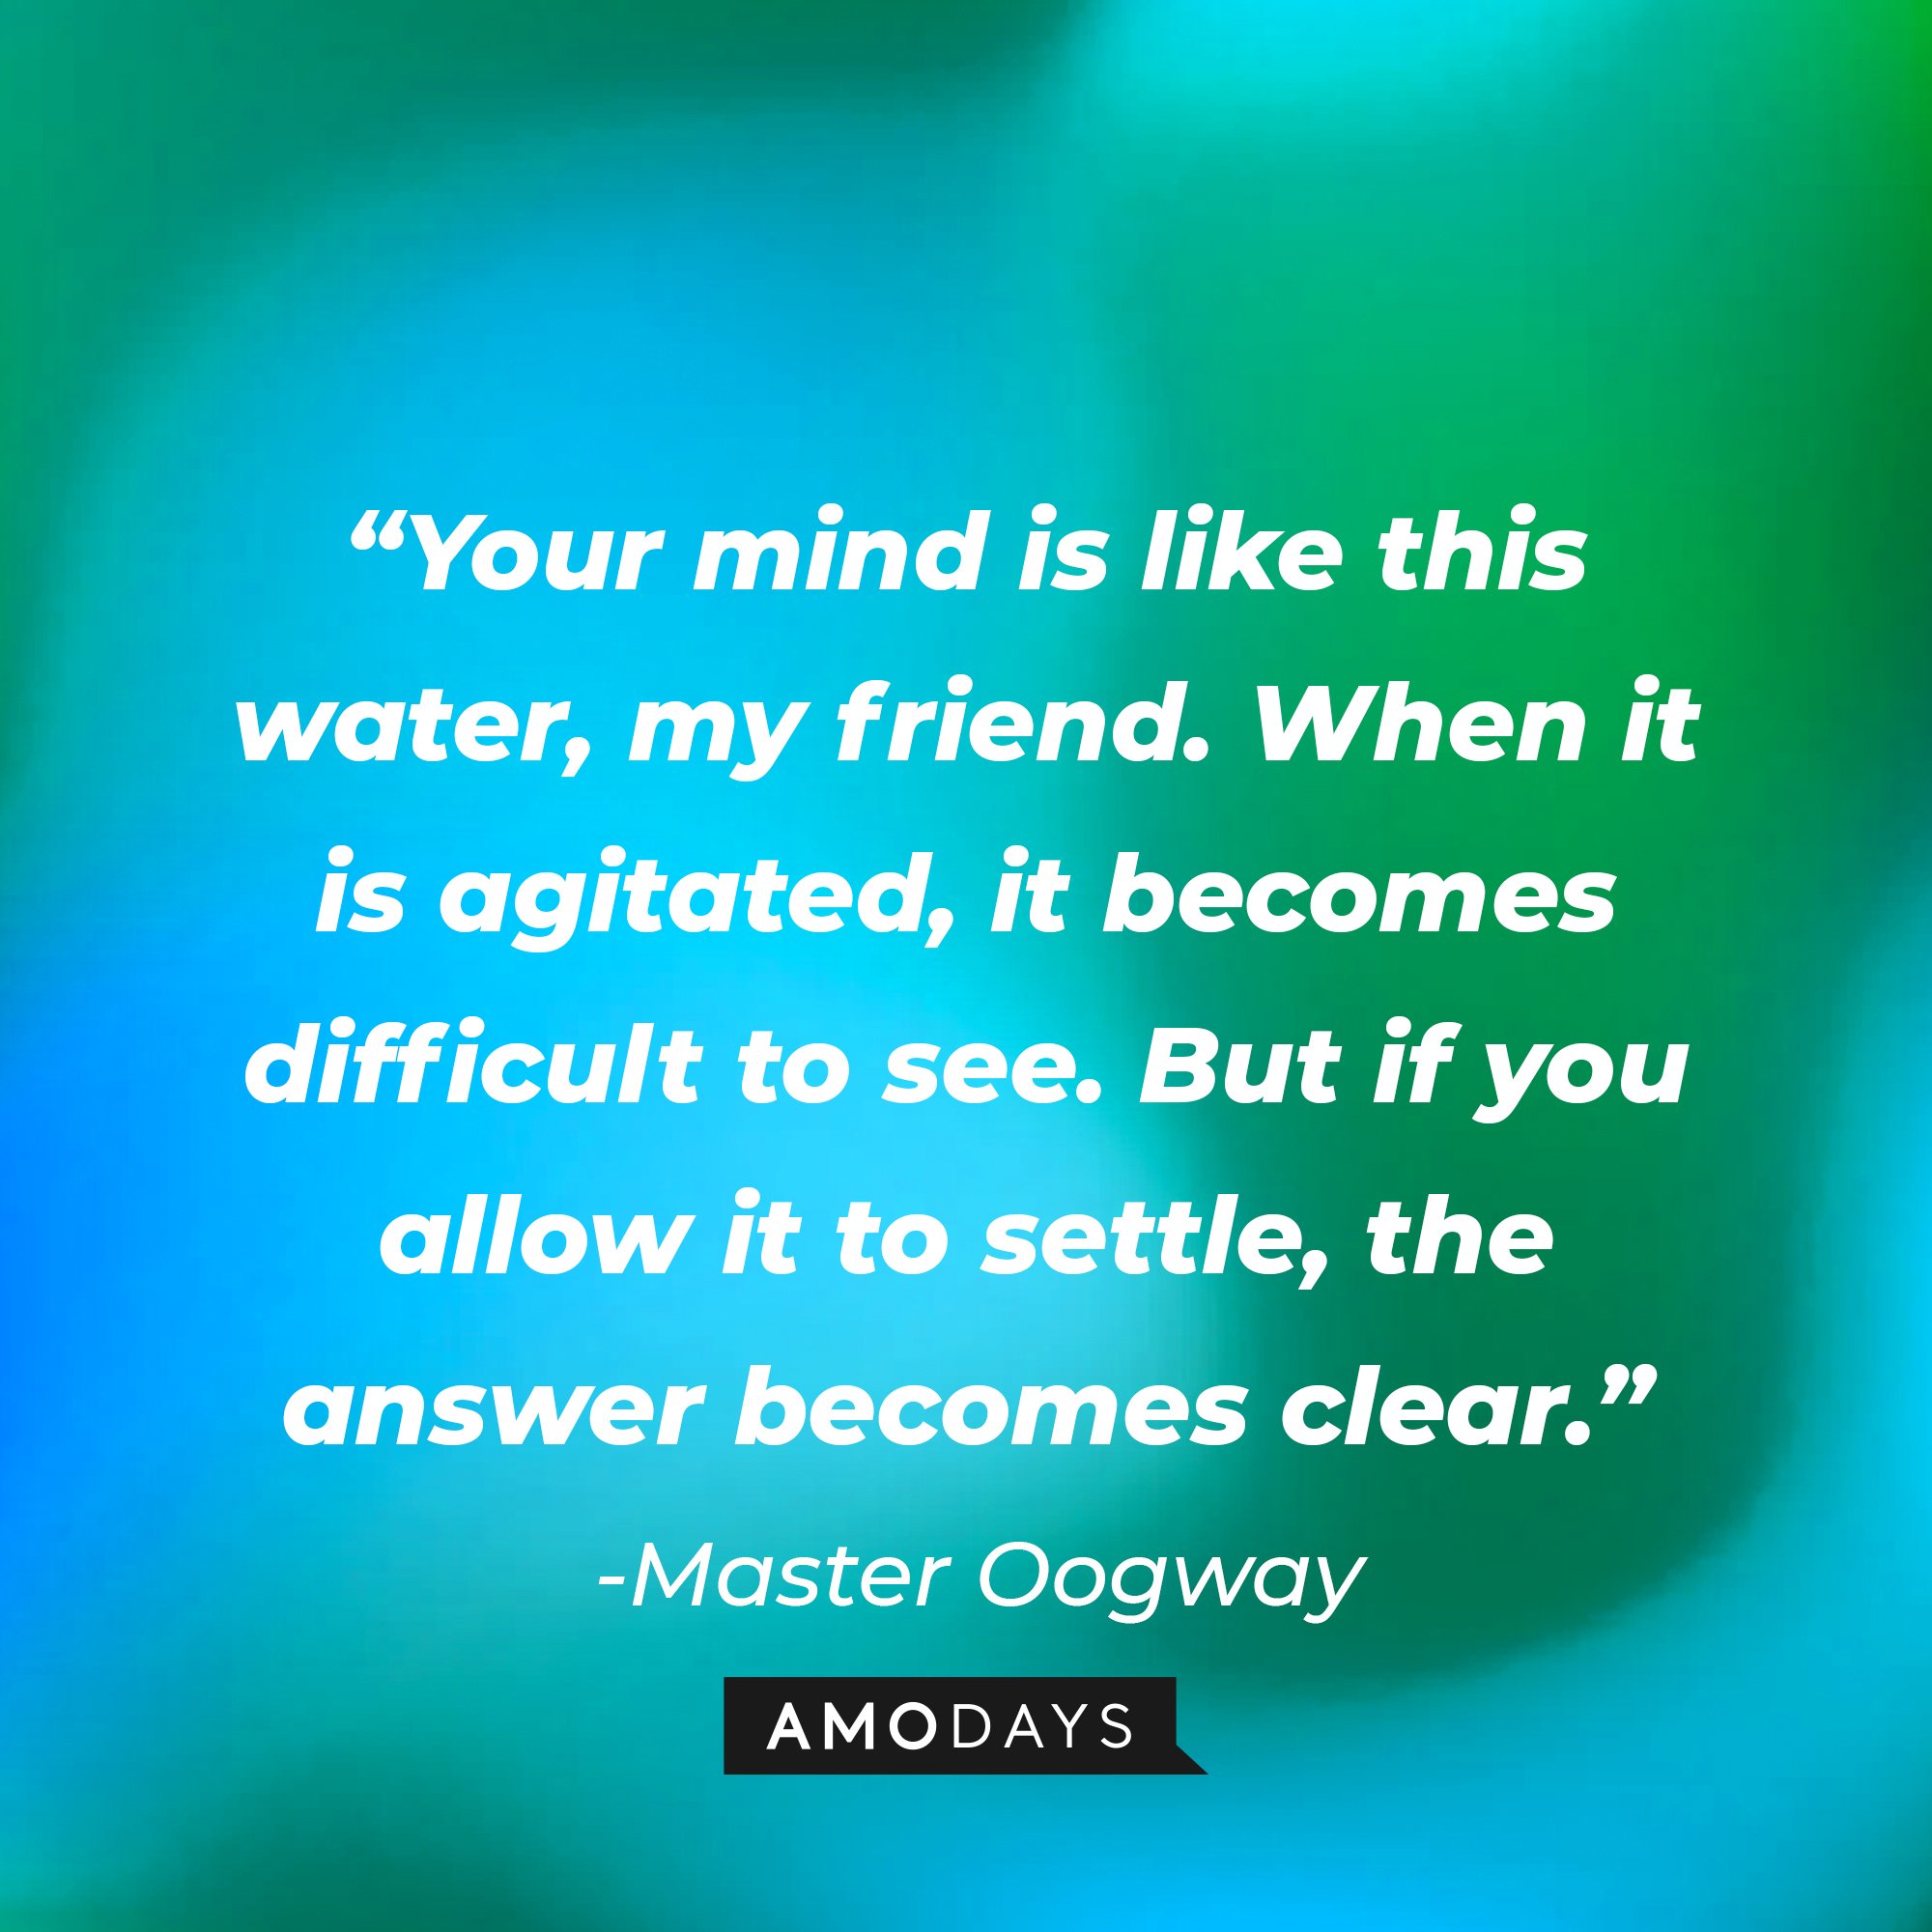 Master Oogway's quote: “Your mind is like this water, my friend. When it is agitated, it becomes difficult to see. But if you allow it to settle, the answer becomes clear.” | Image: AmoDays